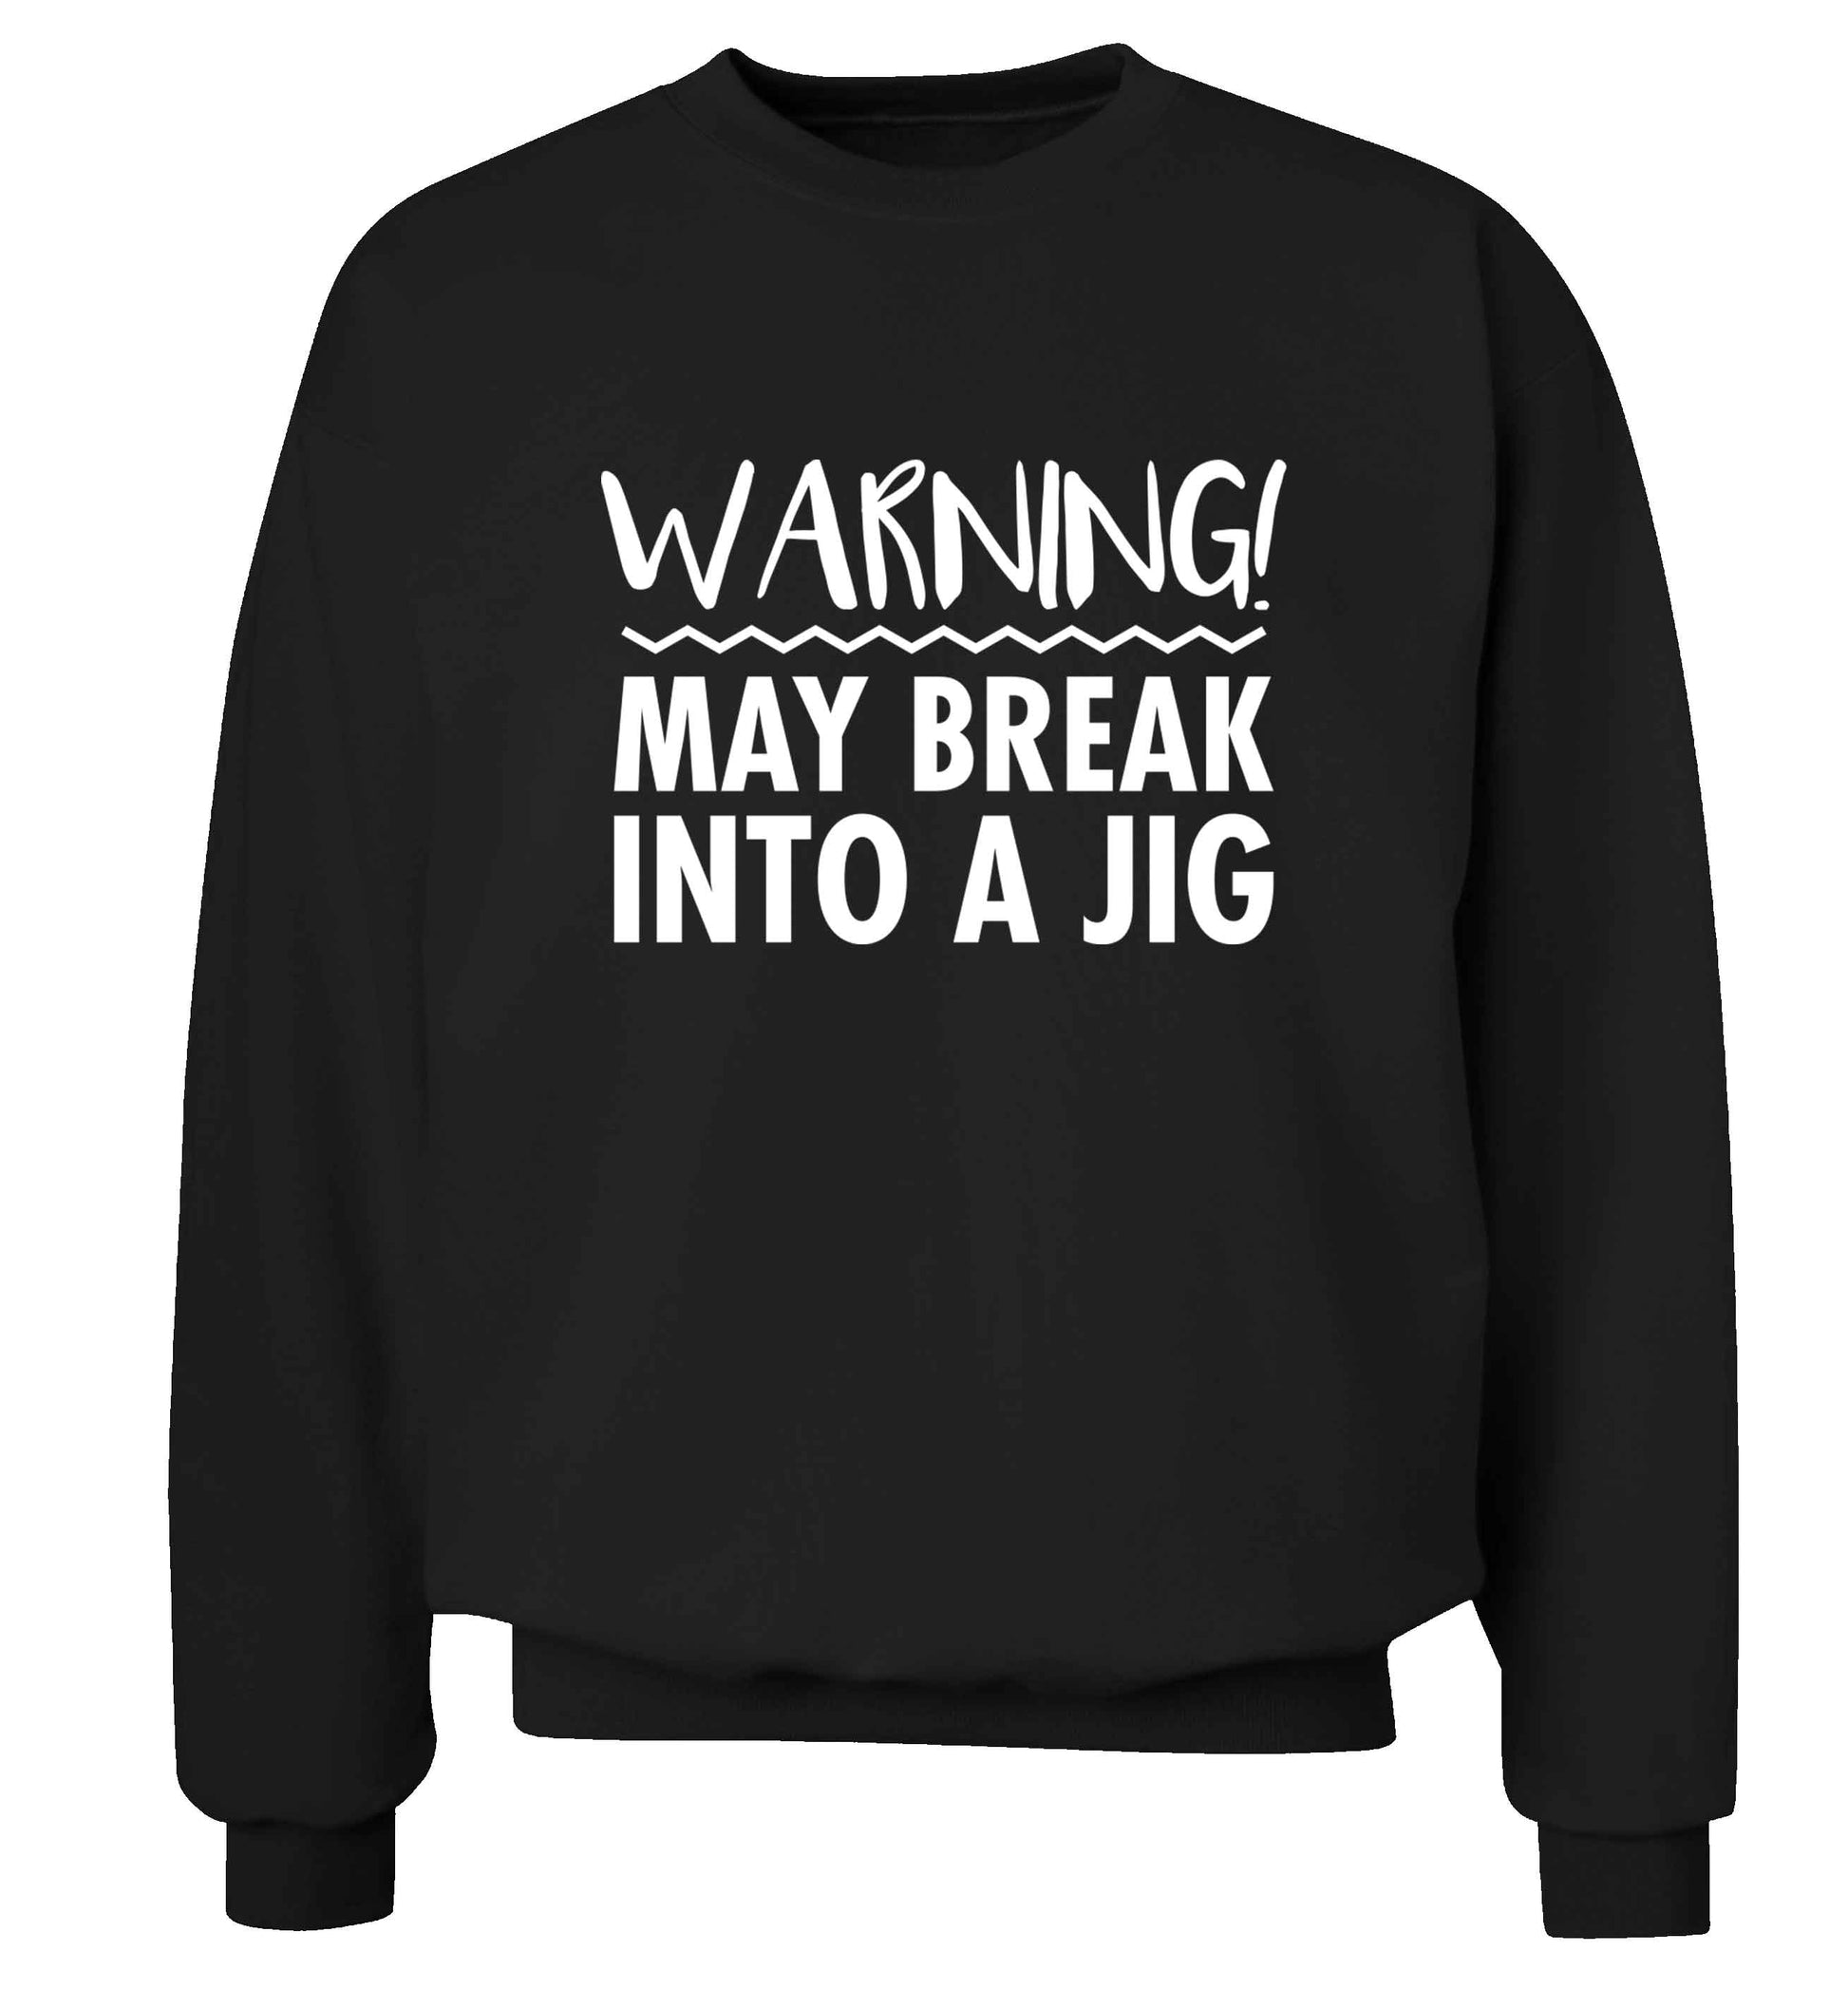 Warning may break into a jig adult's unisex black sweater 2XL